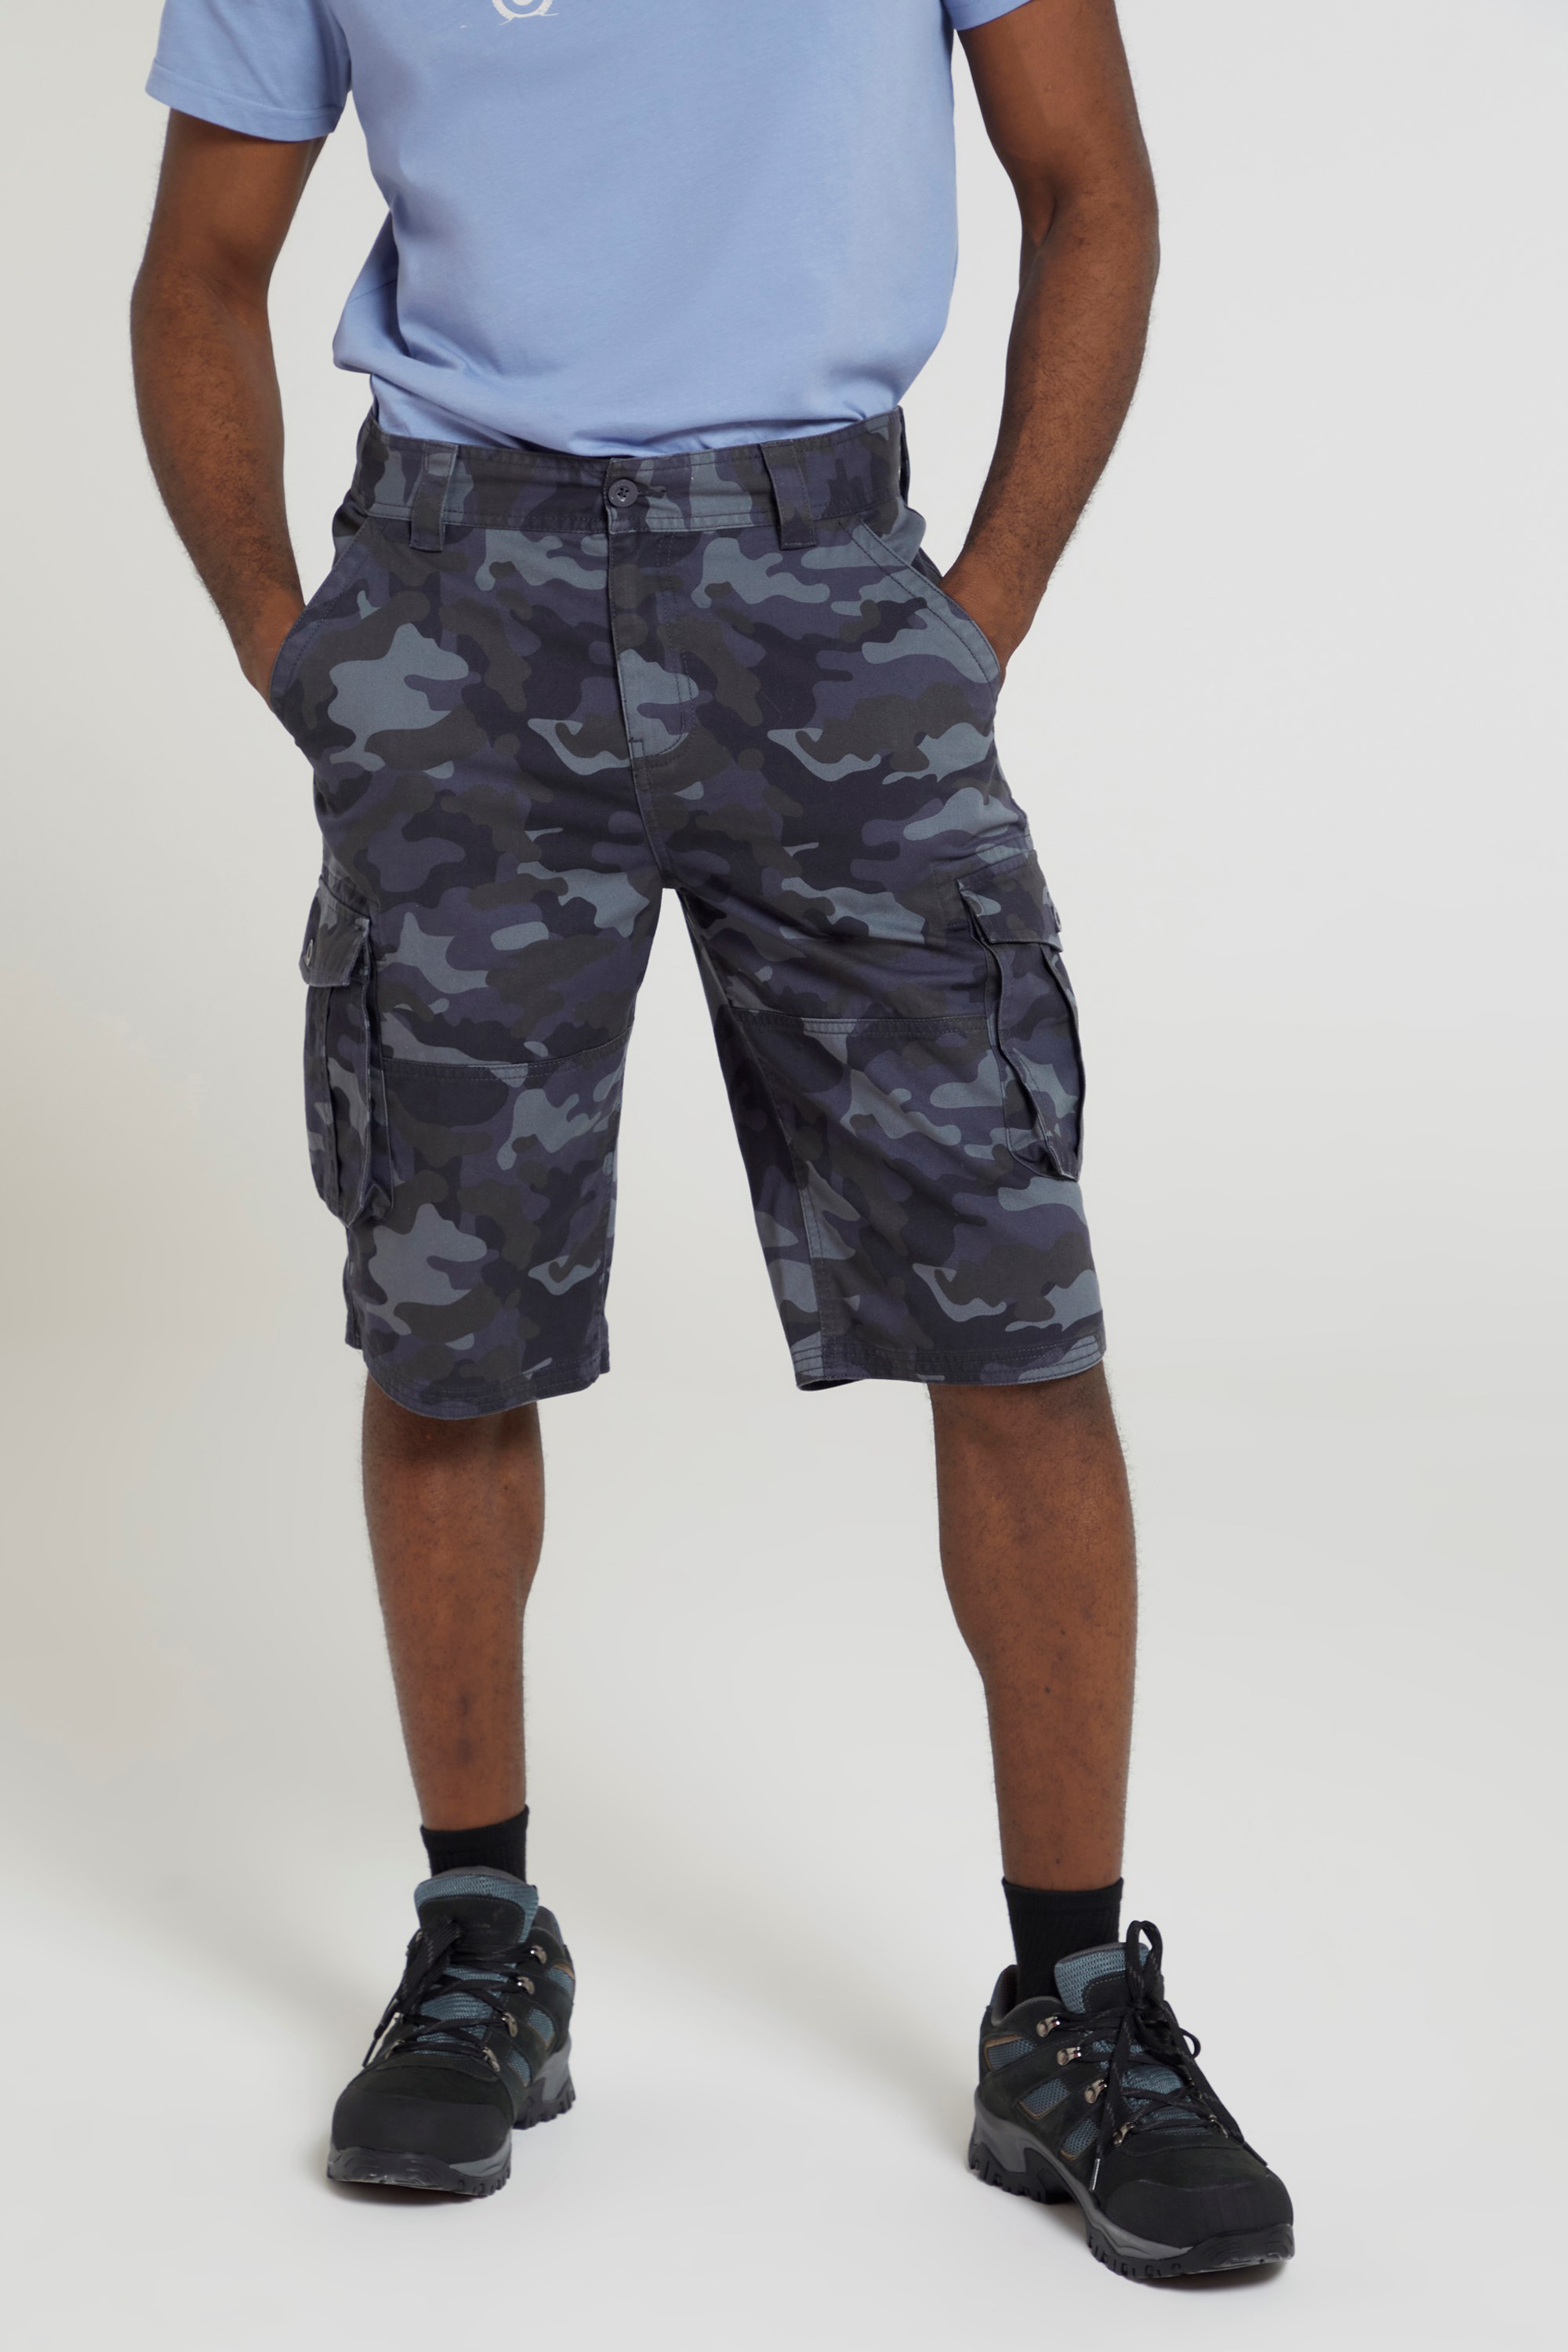 Australian person Have learned Death jaw Mens Camo Cargo Shorts | Mountain Warehouse US